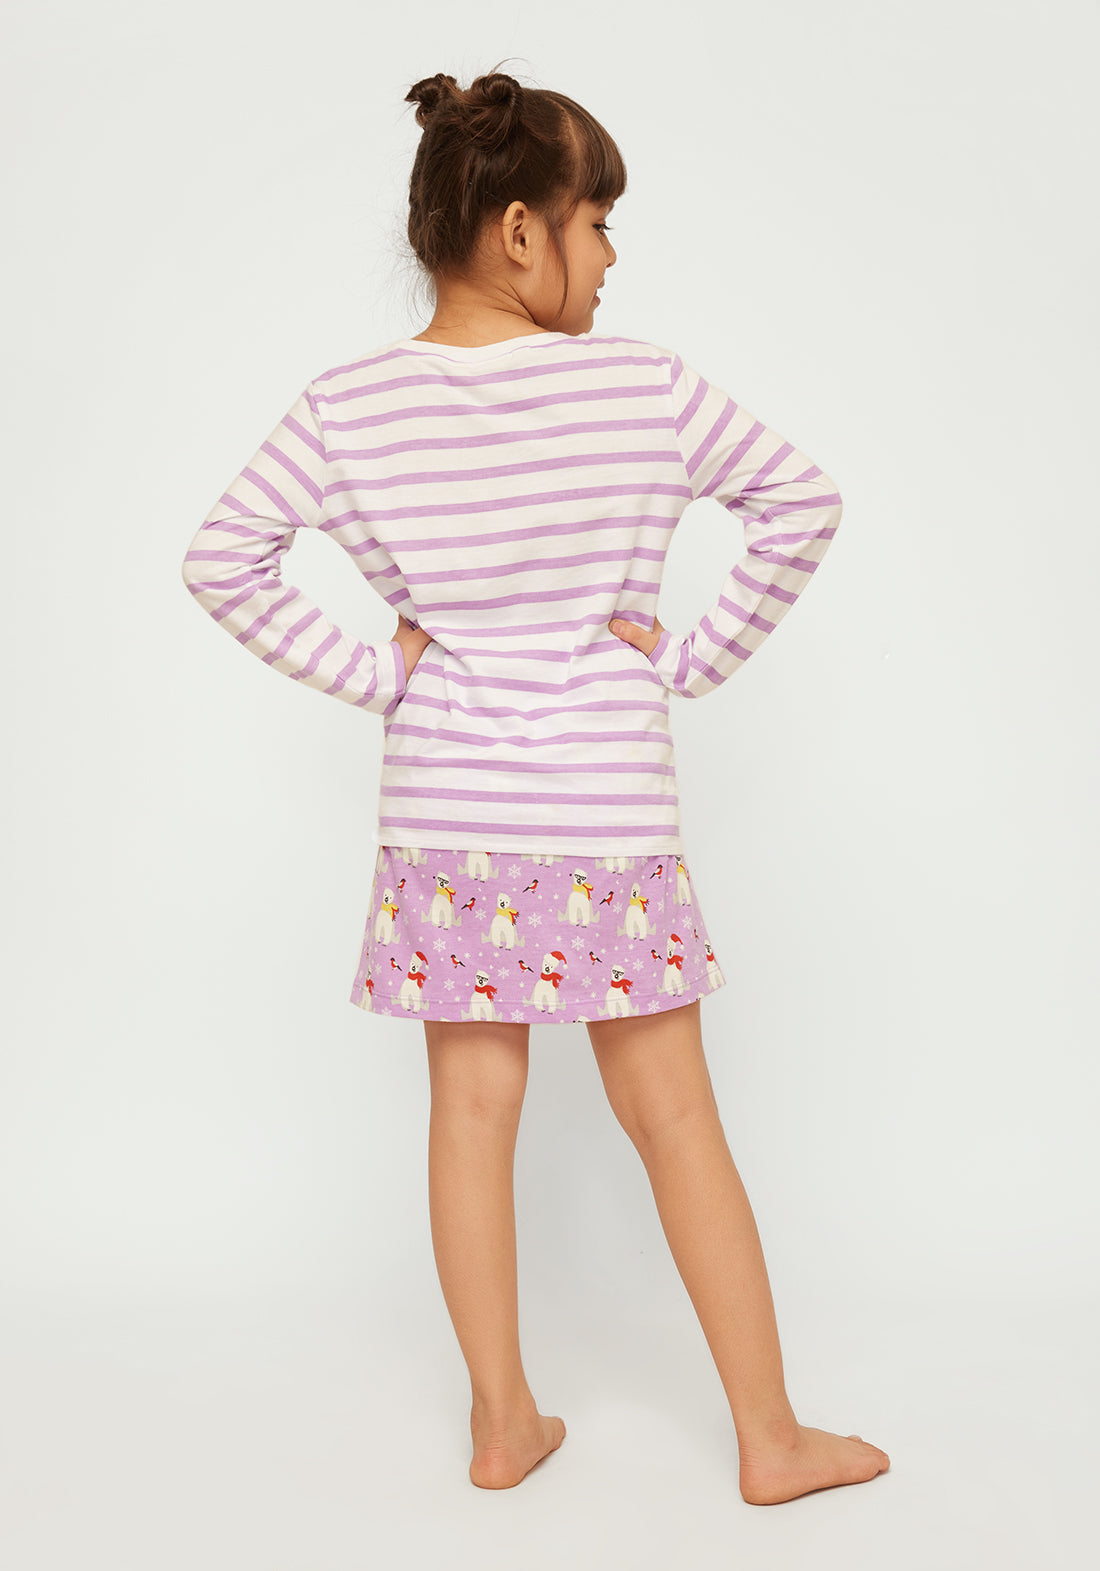 Stripe T-shirt with Lilac and White Polar Bear Printed skirt co-ord Set